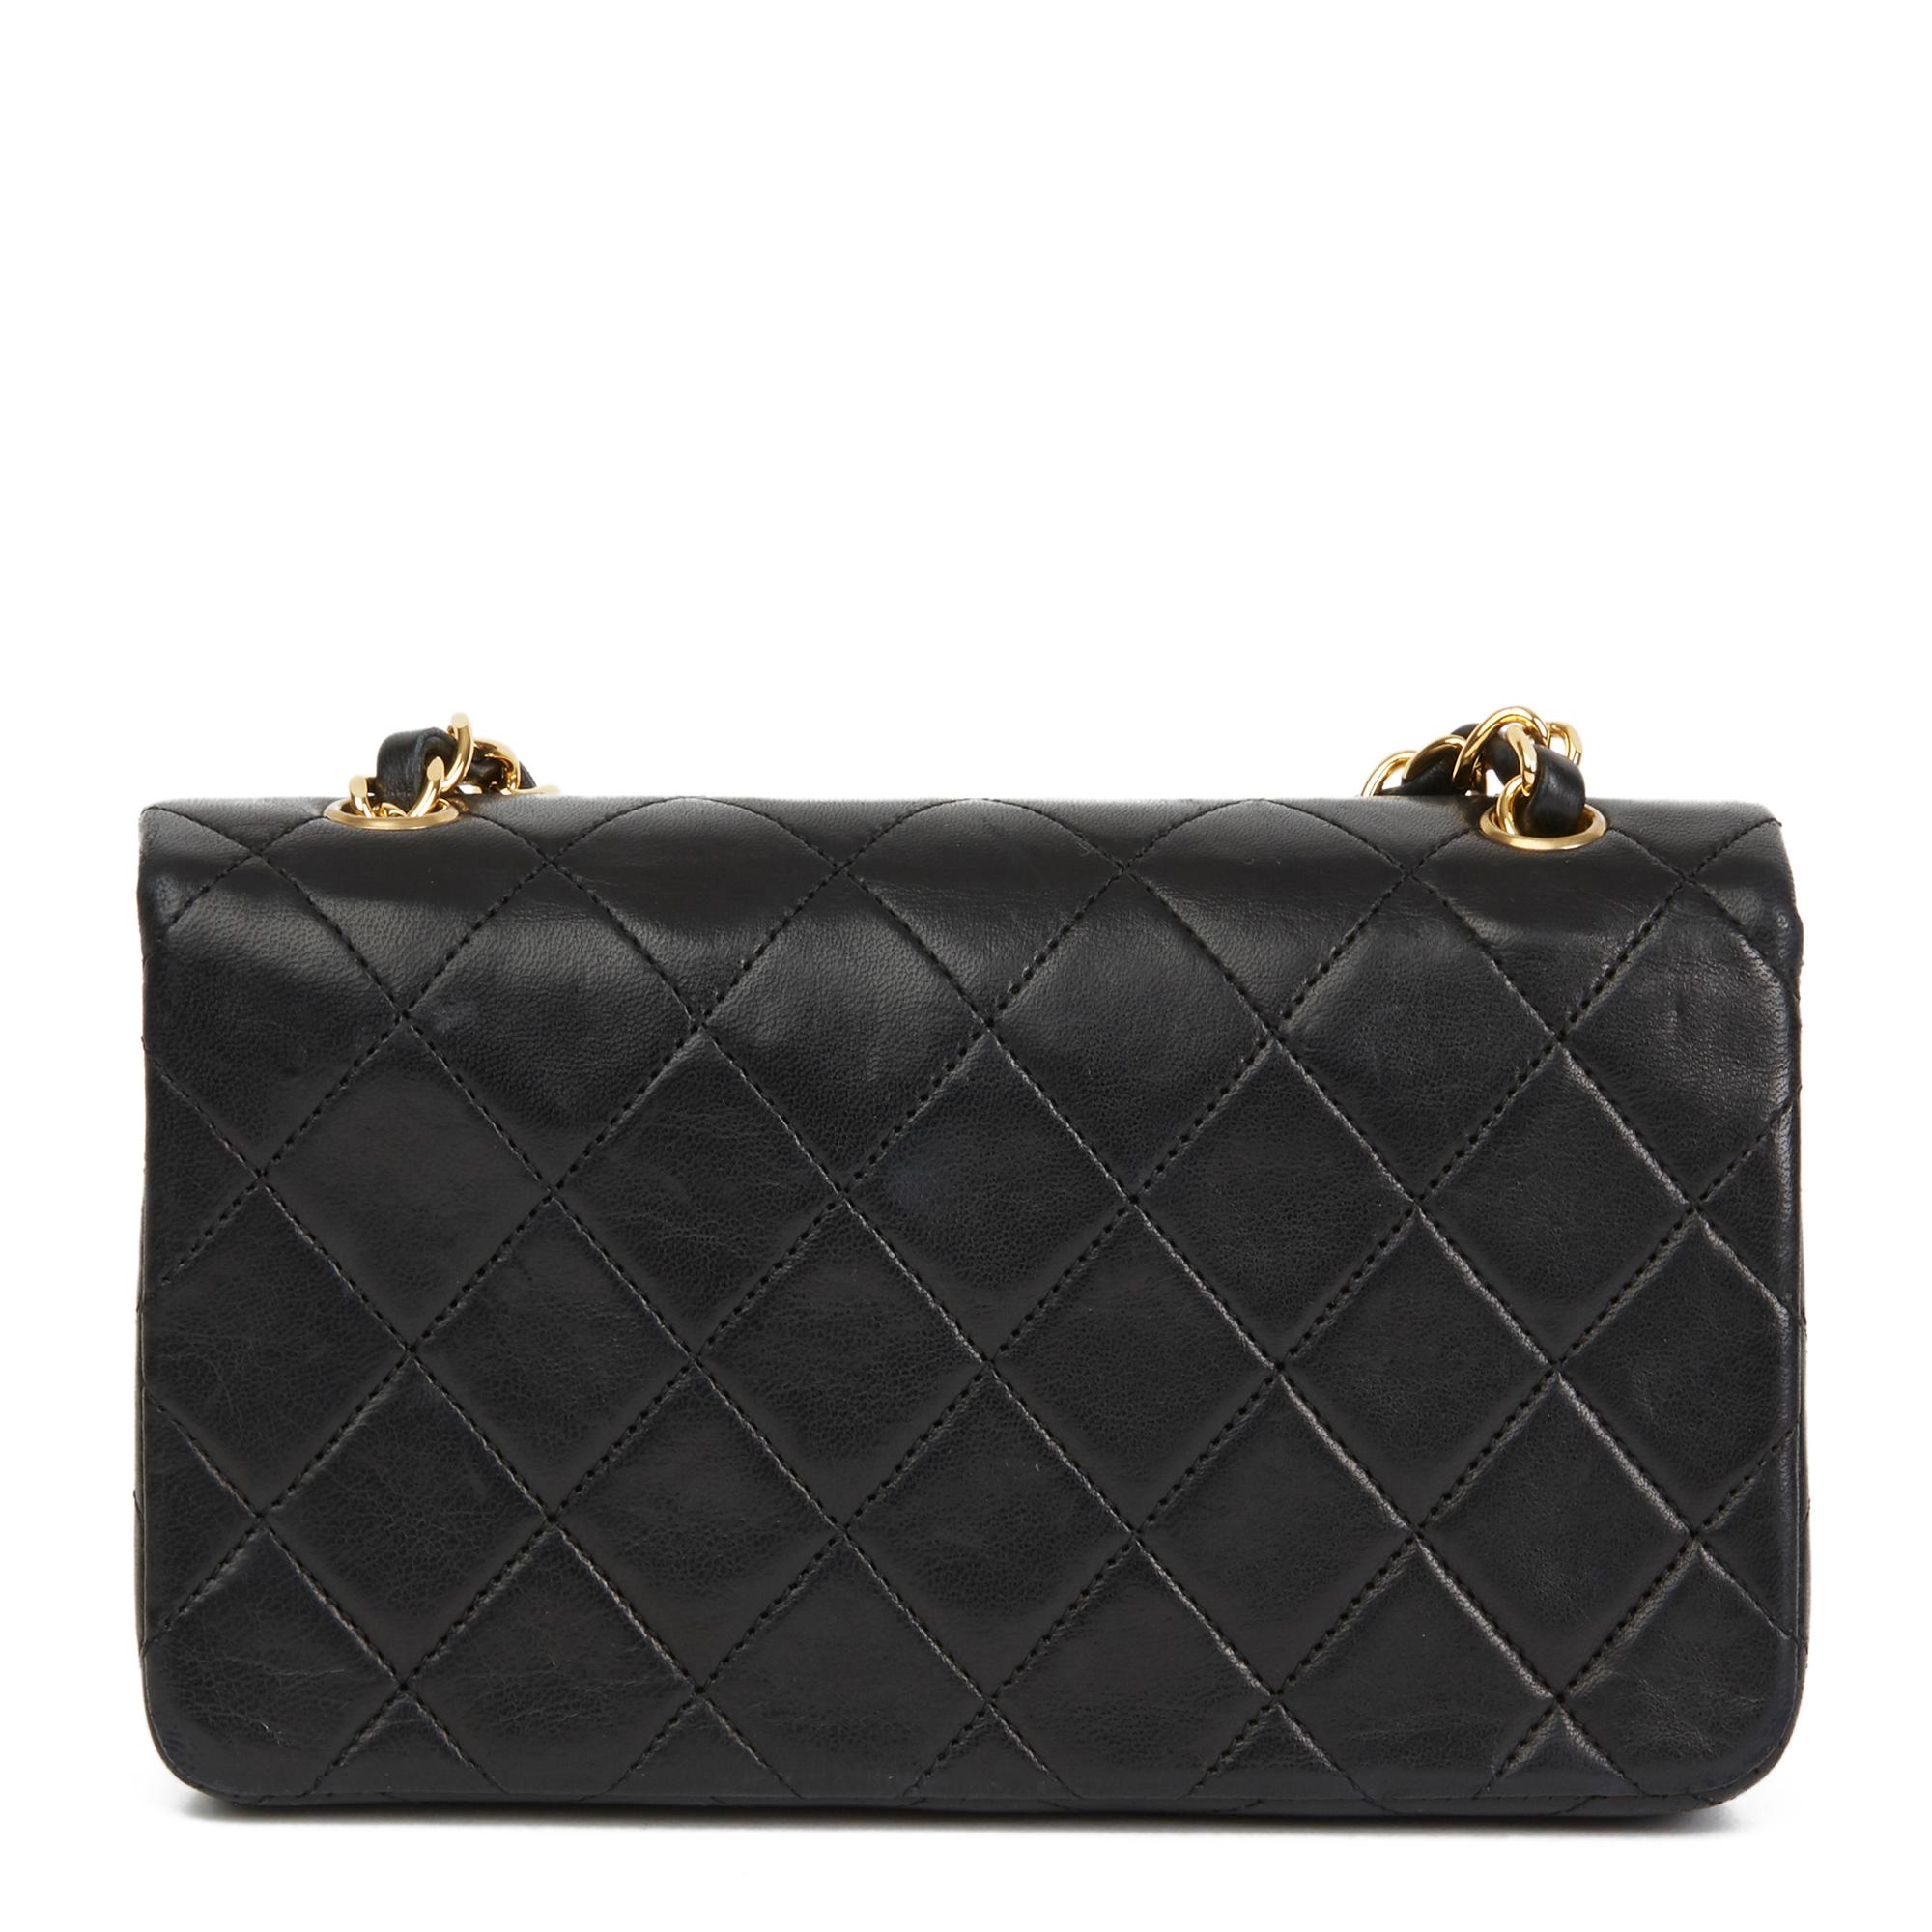 Women's 1990 Chanel Black Quilted Lambskin Vintage Mini Flap Bag